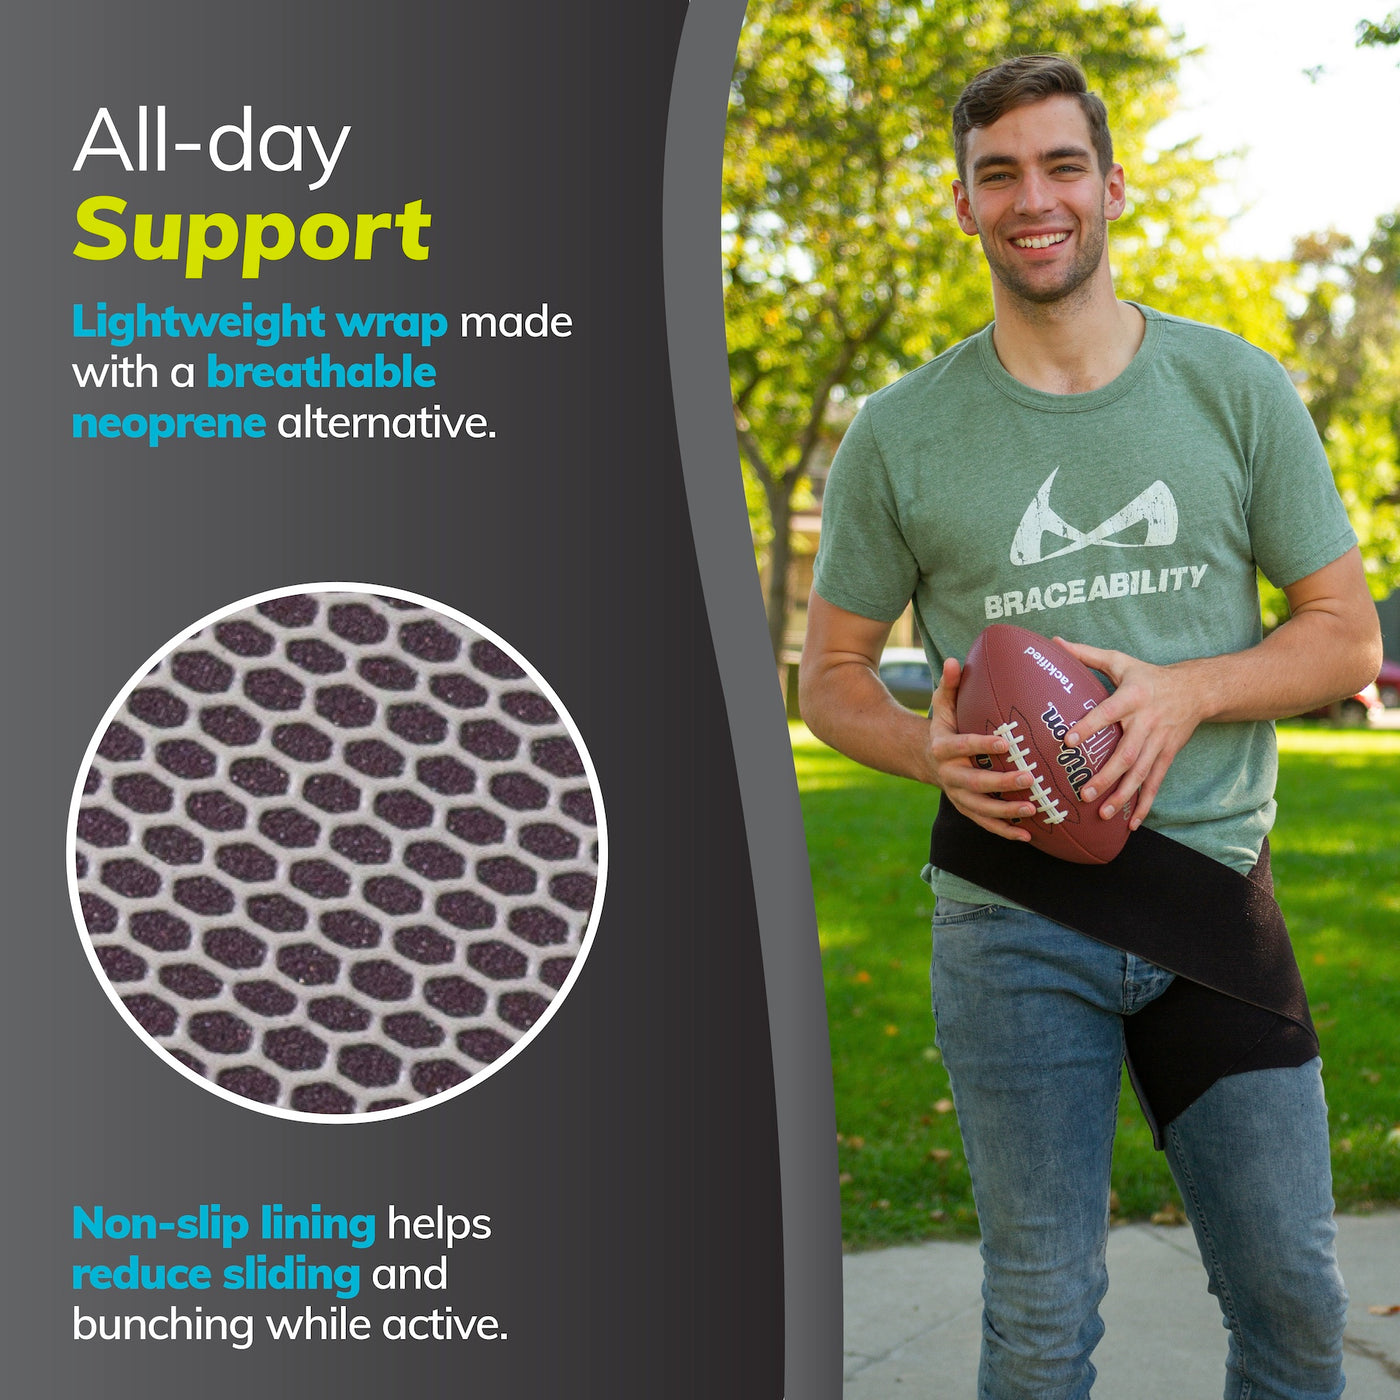 Our hip and groin wrap is made for all day support, thanks to the non-slip lining it can be worn during sports